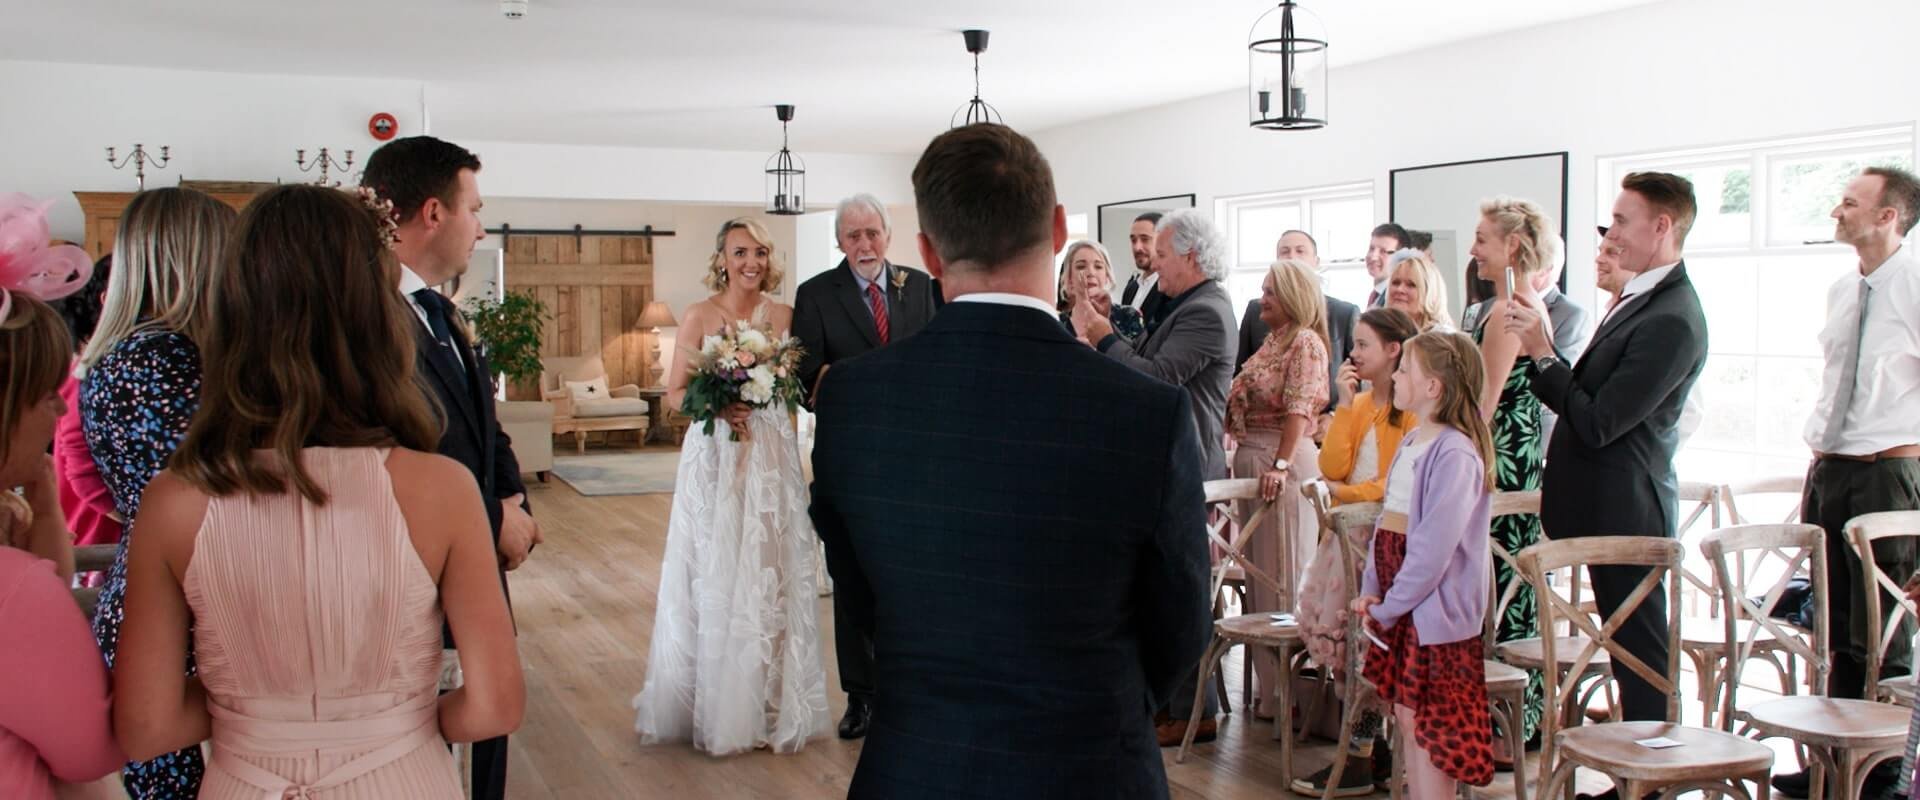 Chris sees Michelle walking down the aisle with her father for the first time